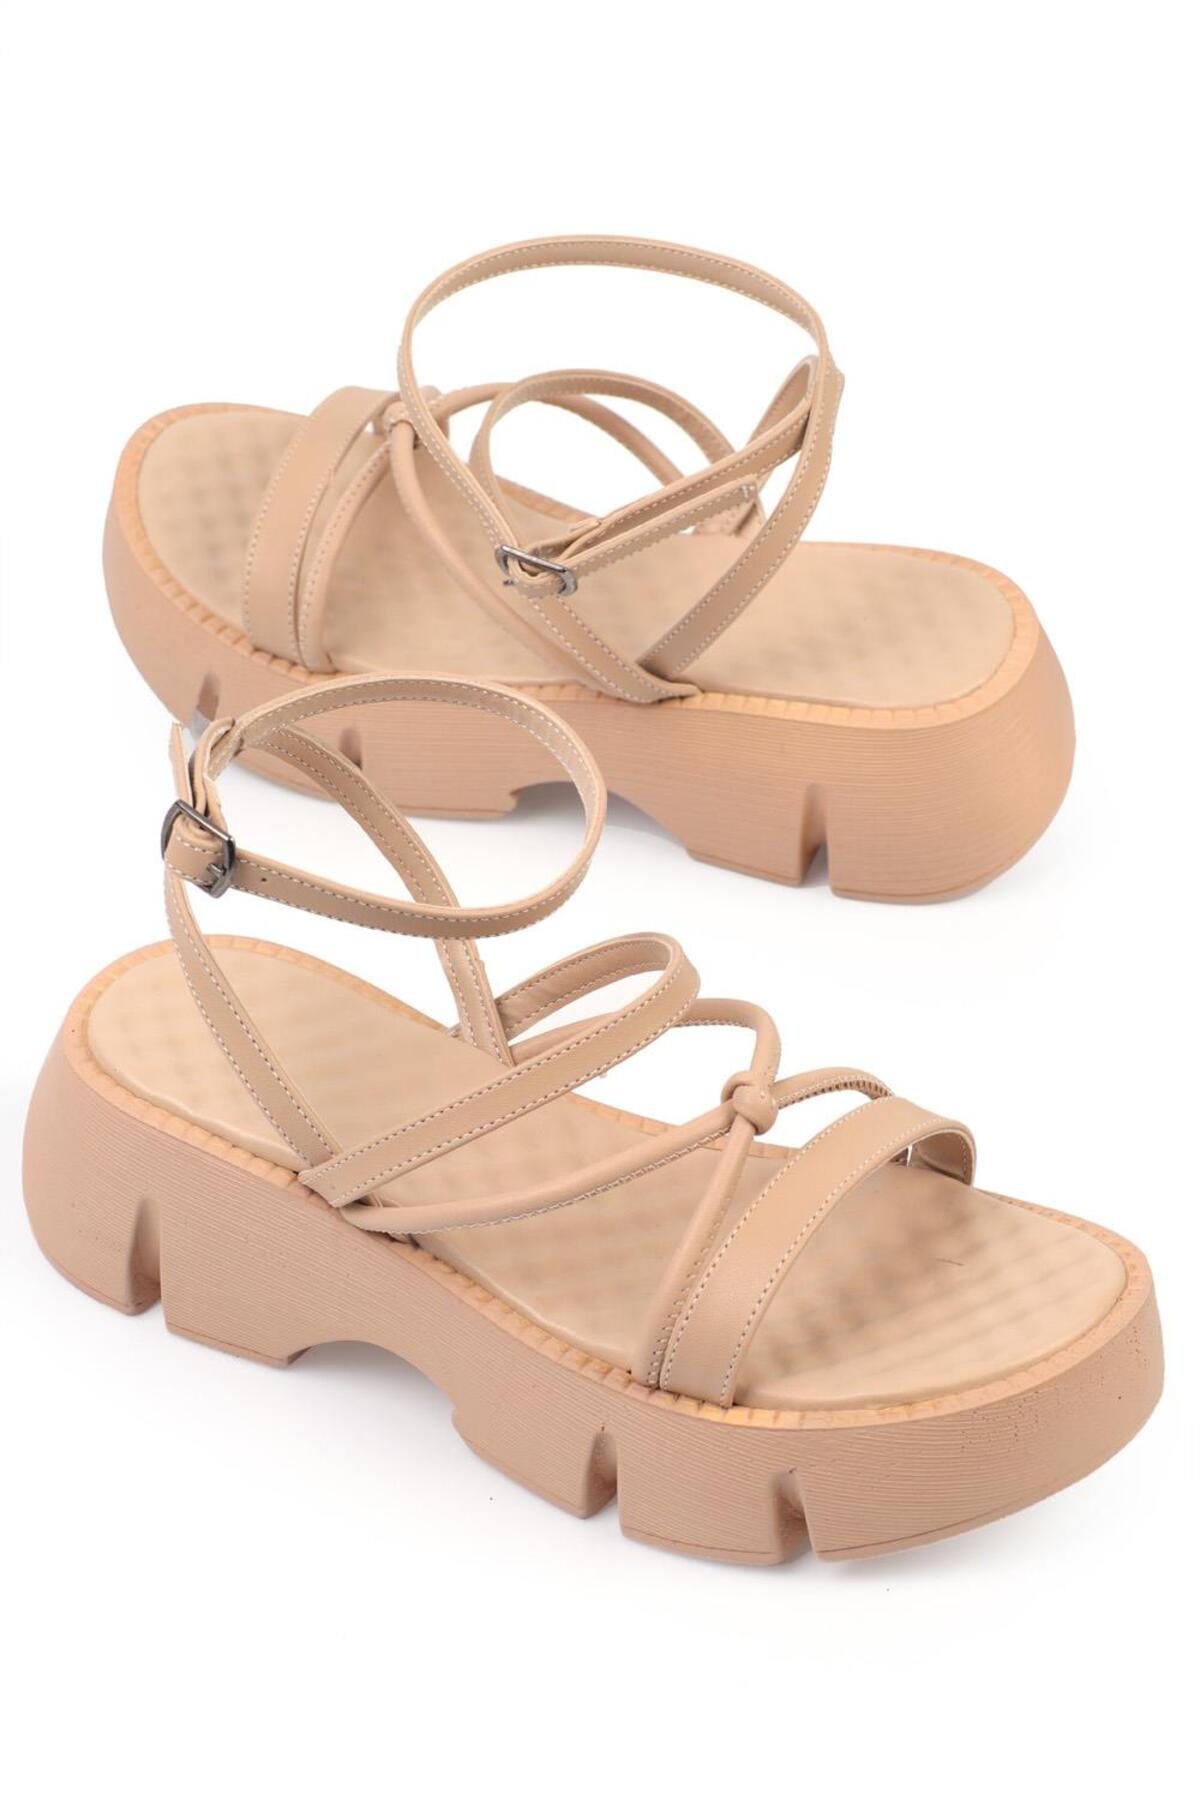 Levně Capone Outfitters Capone Women's Thick soled Beige Sandals with Ankle Strap Comfort Sole